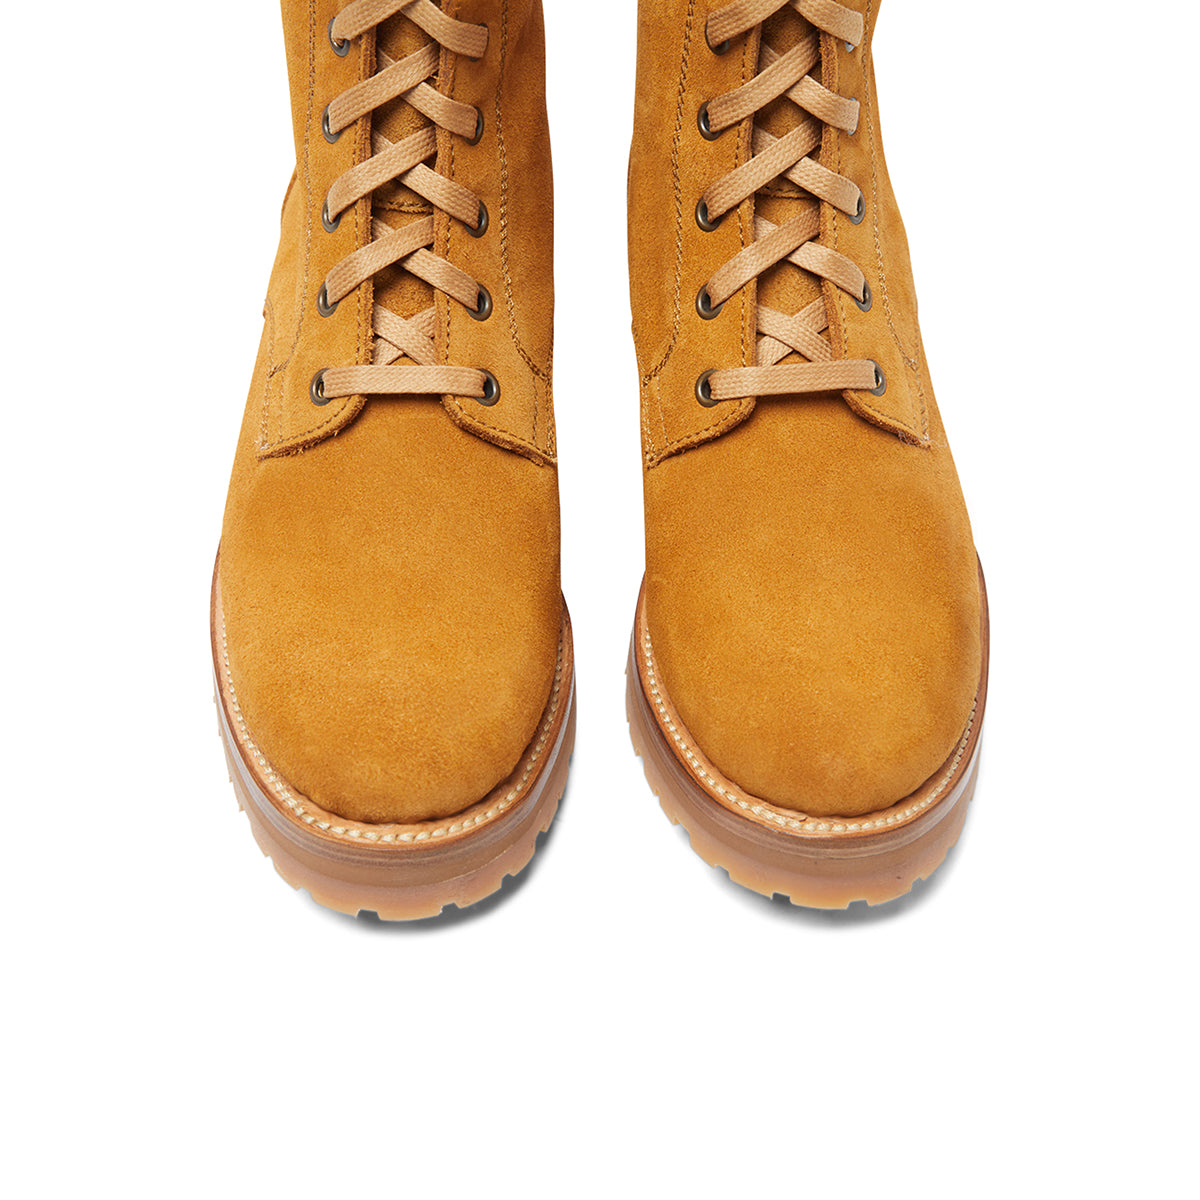 RANCH ROAD BOOTS, POPPY WHISKEY, SUEDE, FRONT TOE DETAIL